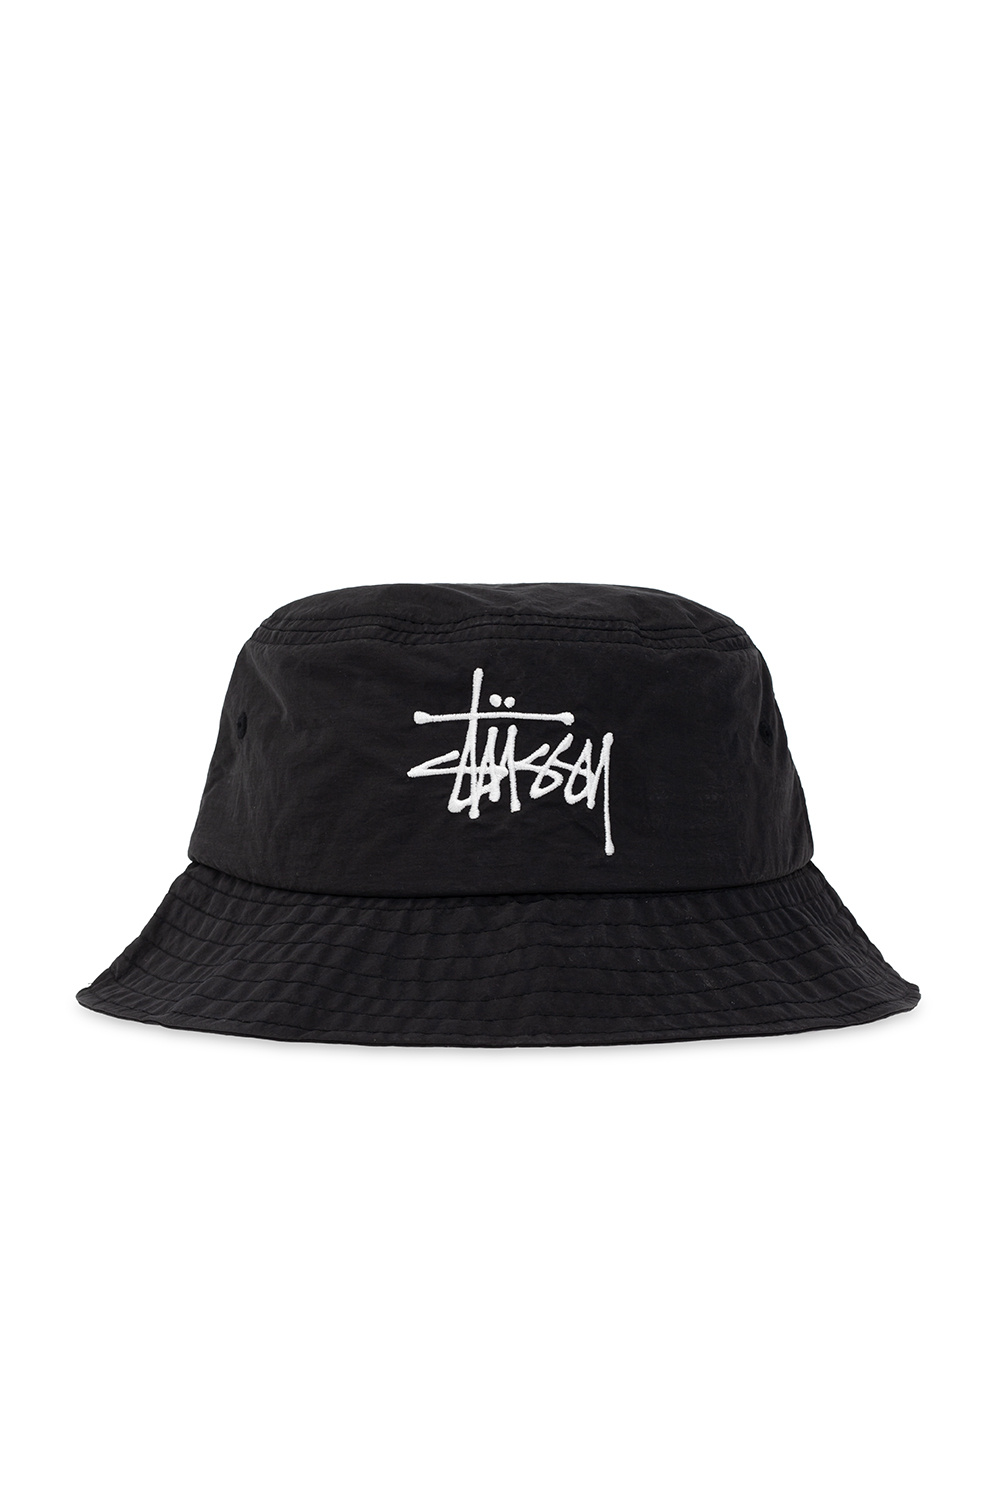 Stussy the north face international reversible south korea bucket and hat